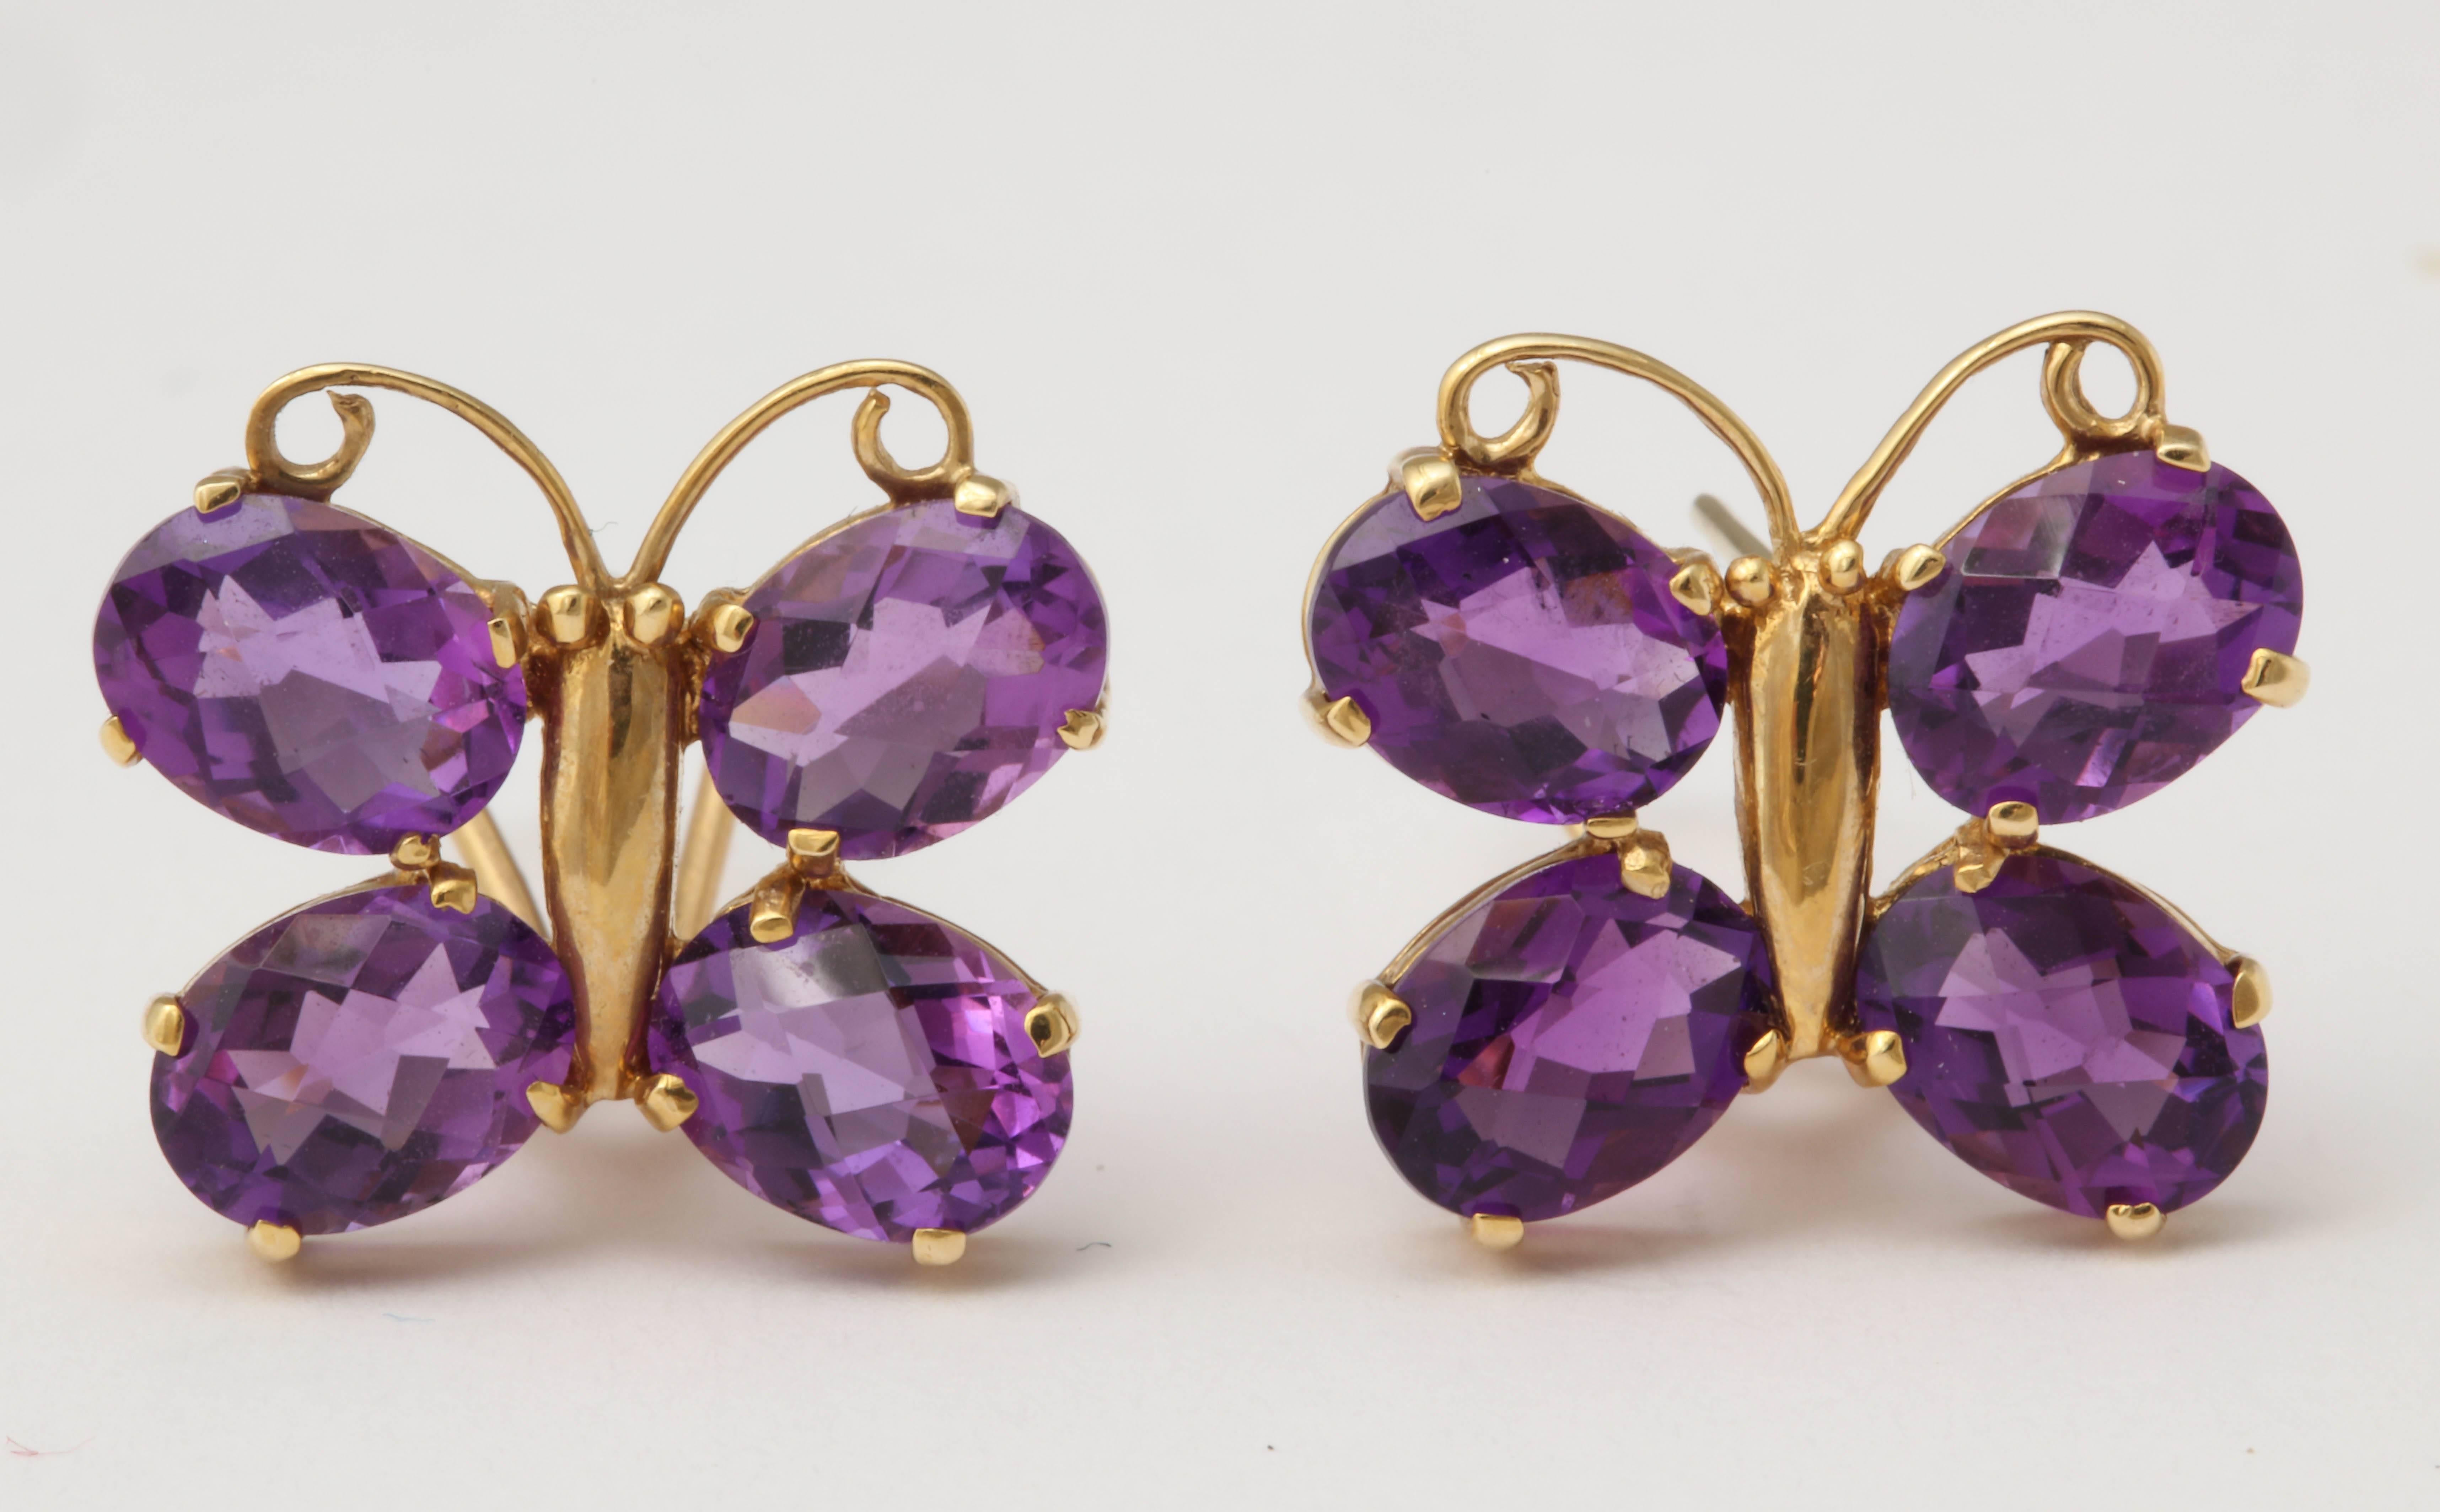 Each earrings is composed of 4 matching faceted oval amethysts around a 14 kt gold body and antennae. There is a post and a clip for security and stability.
These earrings match ring # j6961703062505783fs